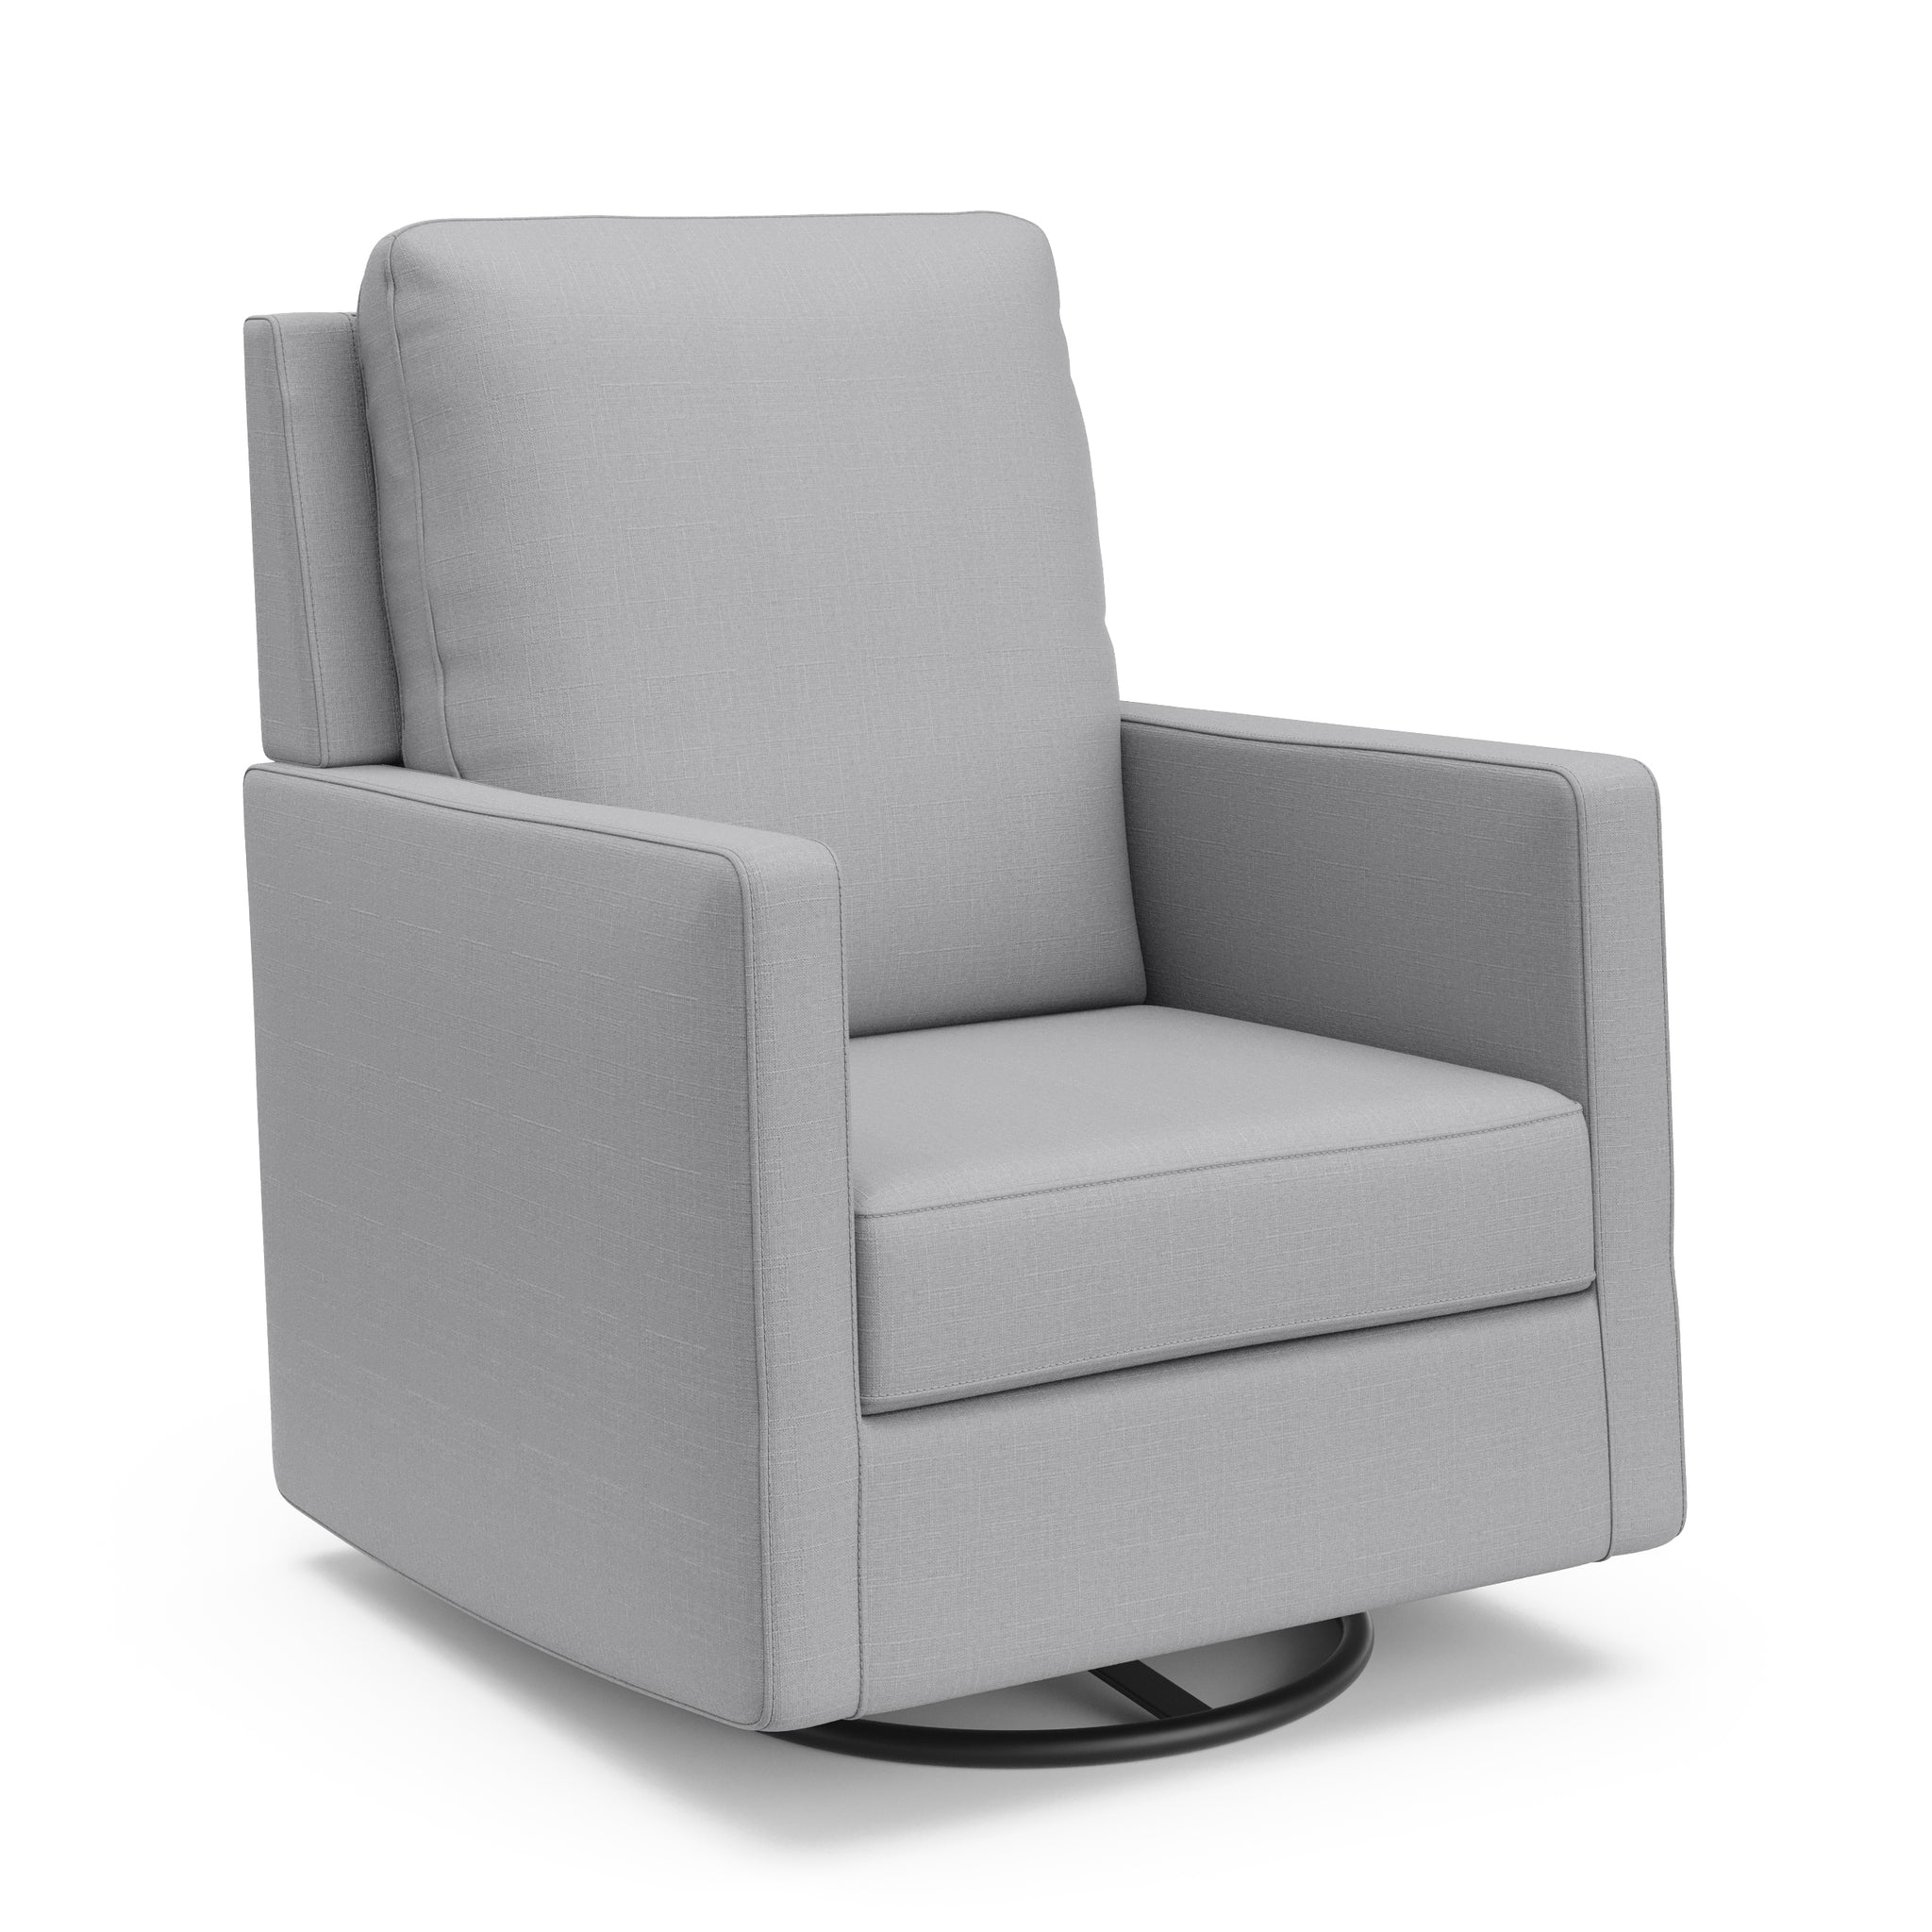 Fog-colored swivel glider in angled view